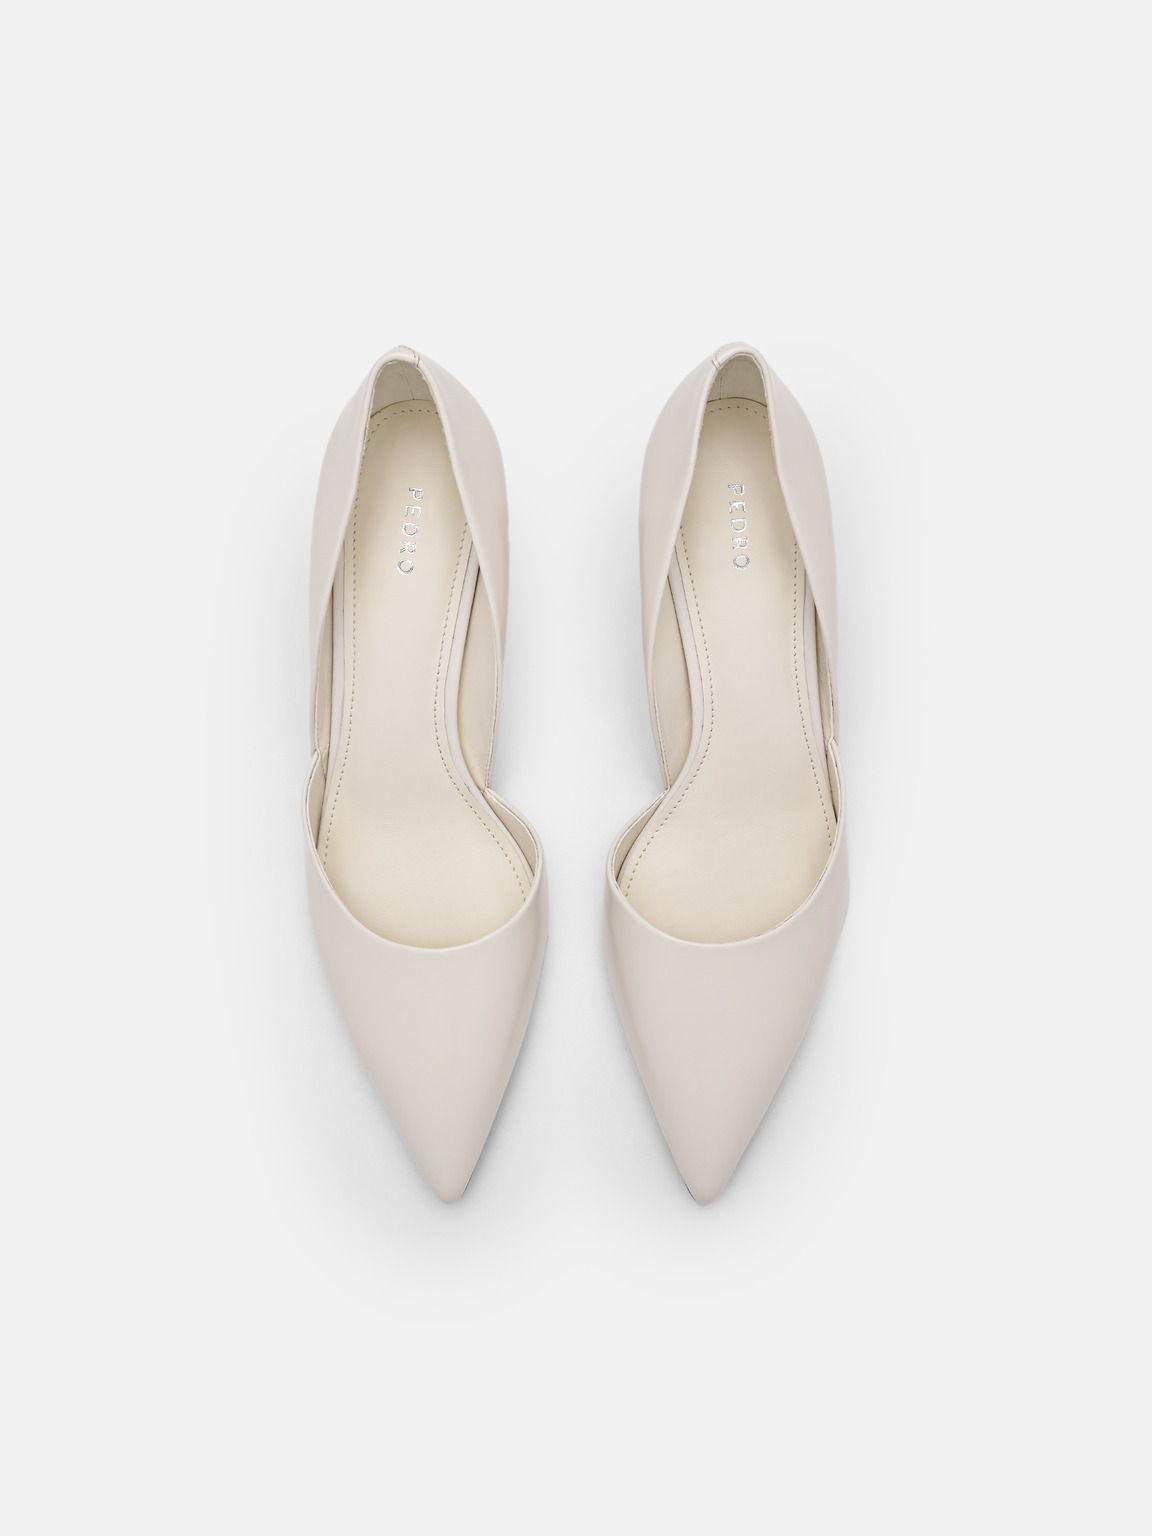 Rocco Leather Heel D'Orsay Pumps, Chalk